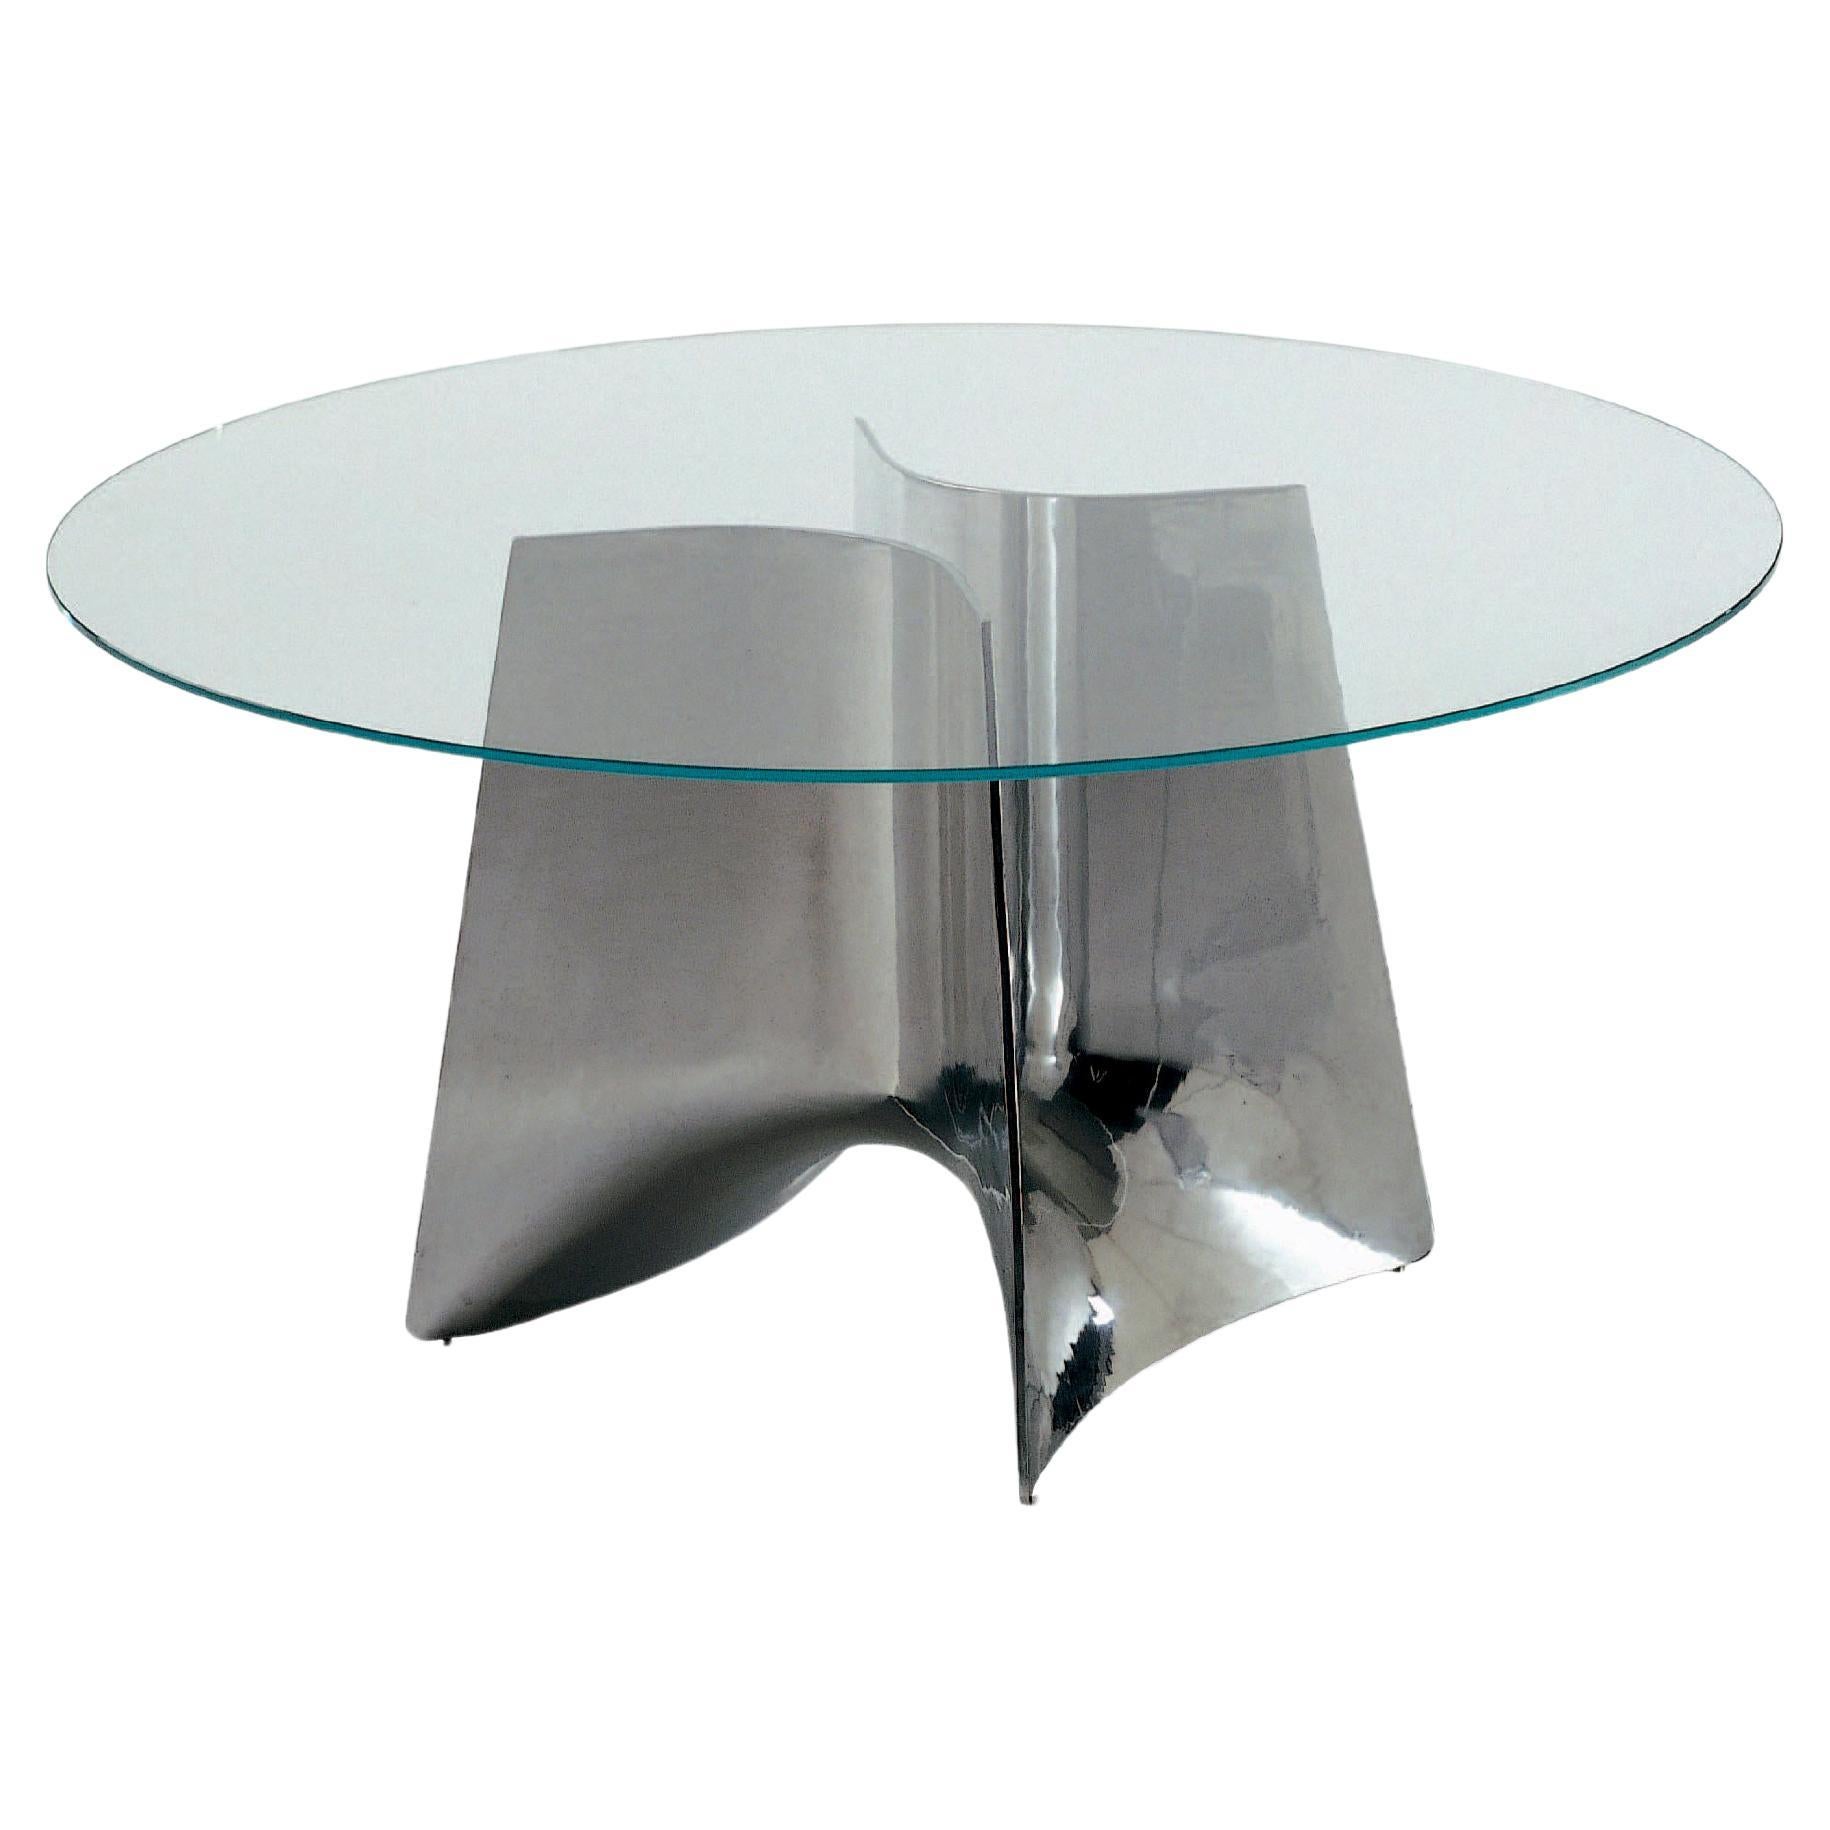 The form of the Bentz table base derives from a simple profile swept along a down and up trajectory. In doing so, it creates an airy and sculptural central focus with the functional characteristics of a column base. The resulting surface and volume